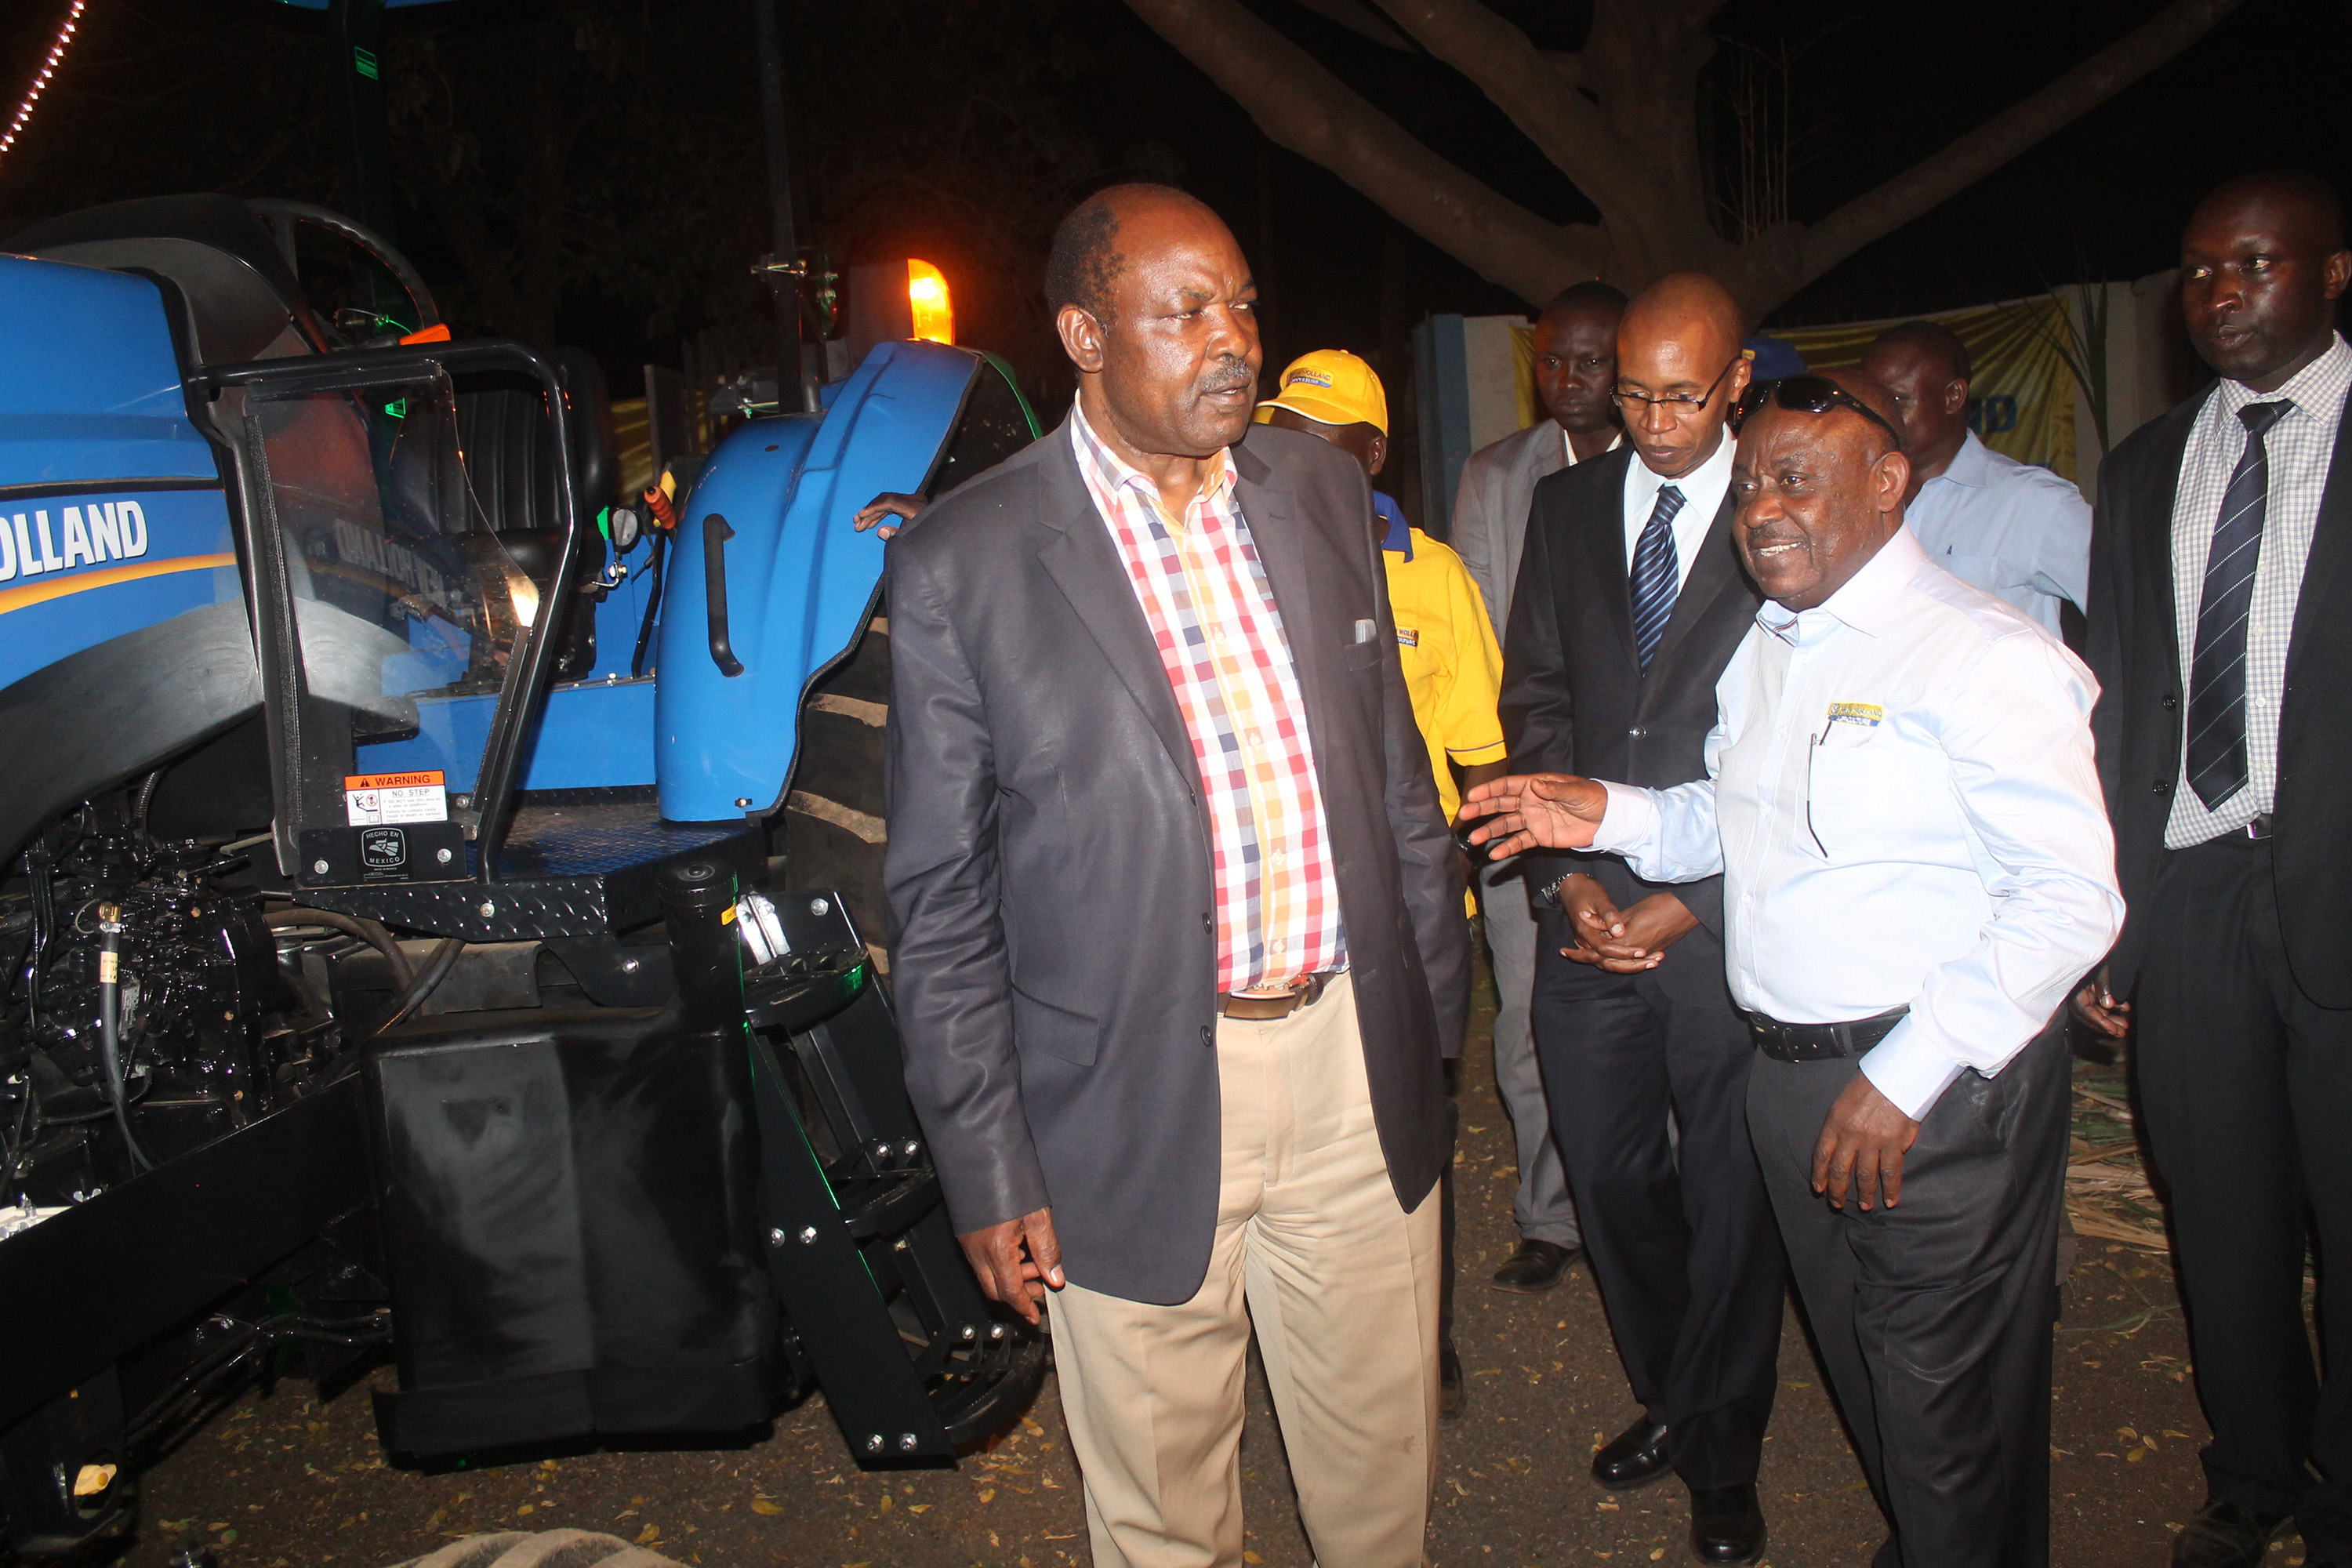 NEW HOLLAND AGRICULTURE LAUNCHES NEW TS6 SERIES TRACTORS IN KENYA